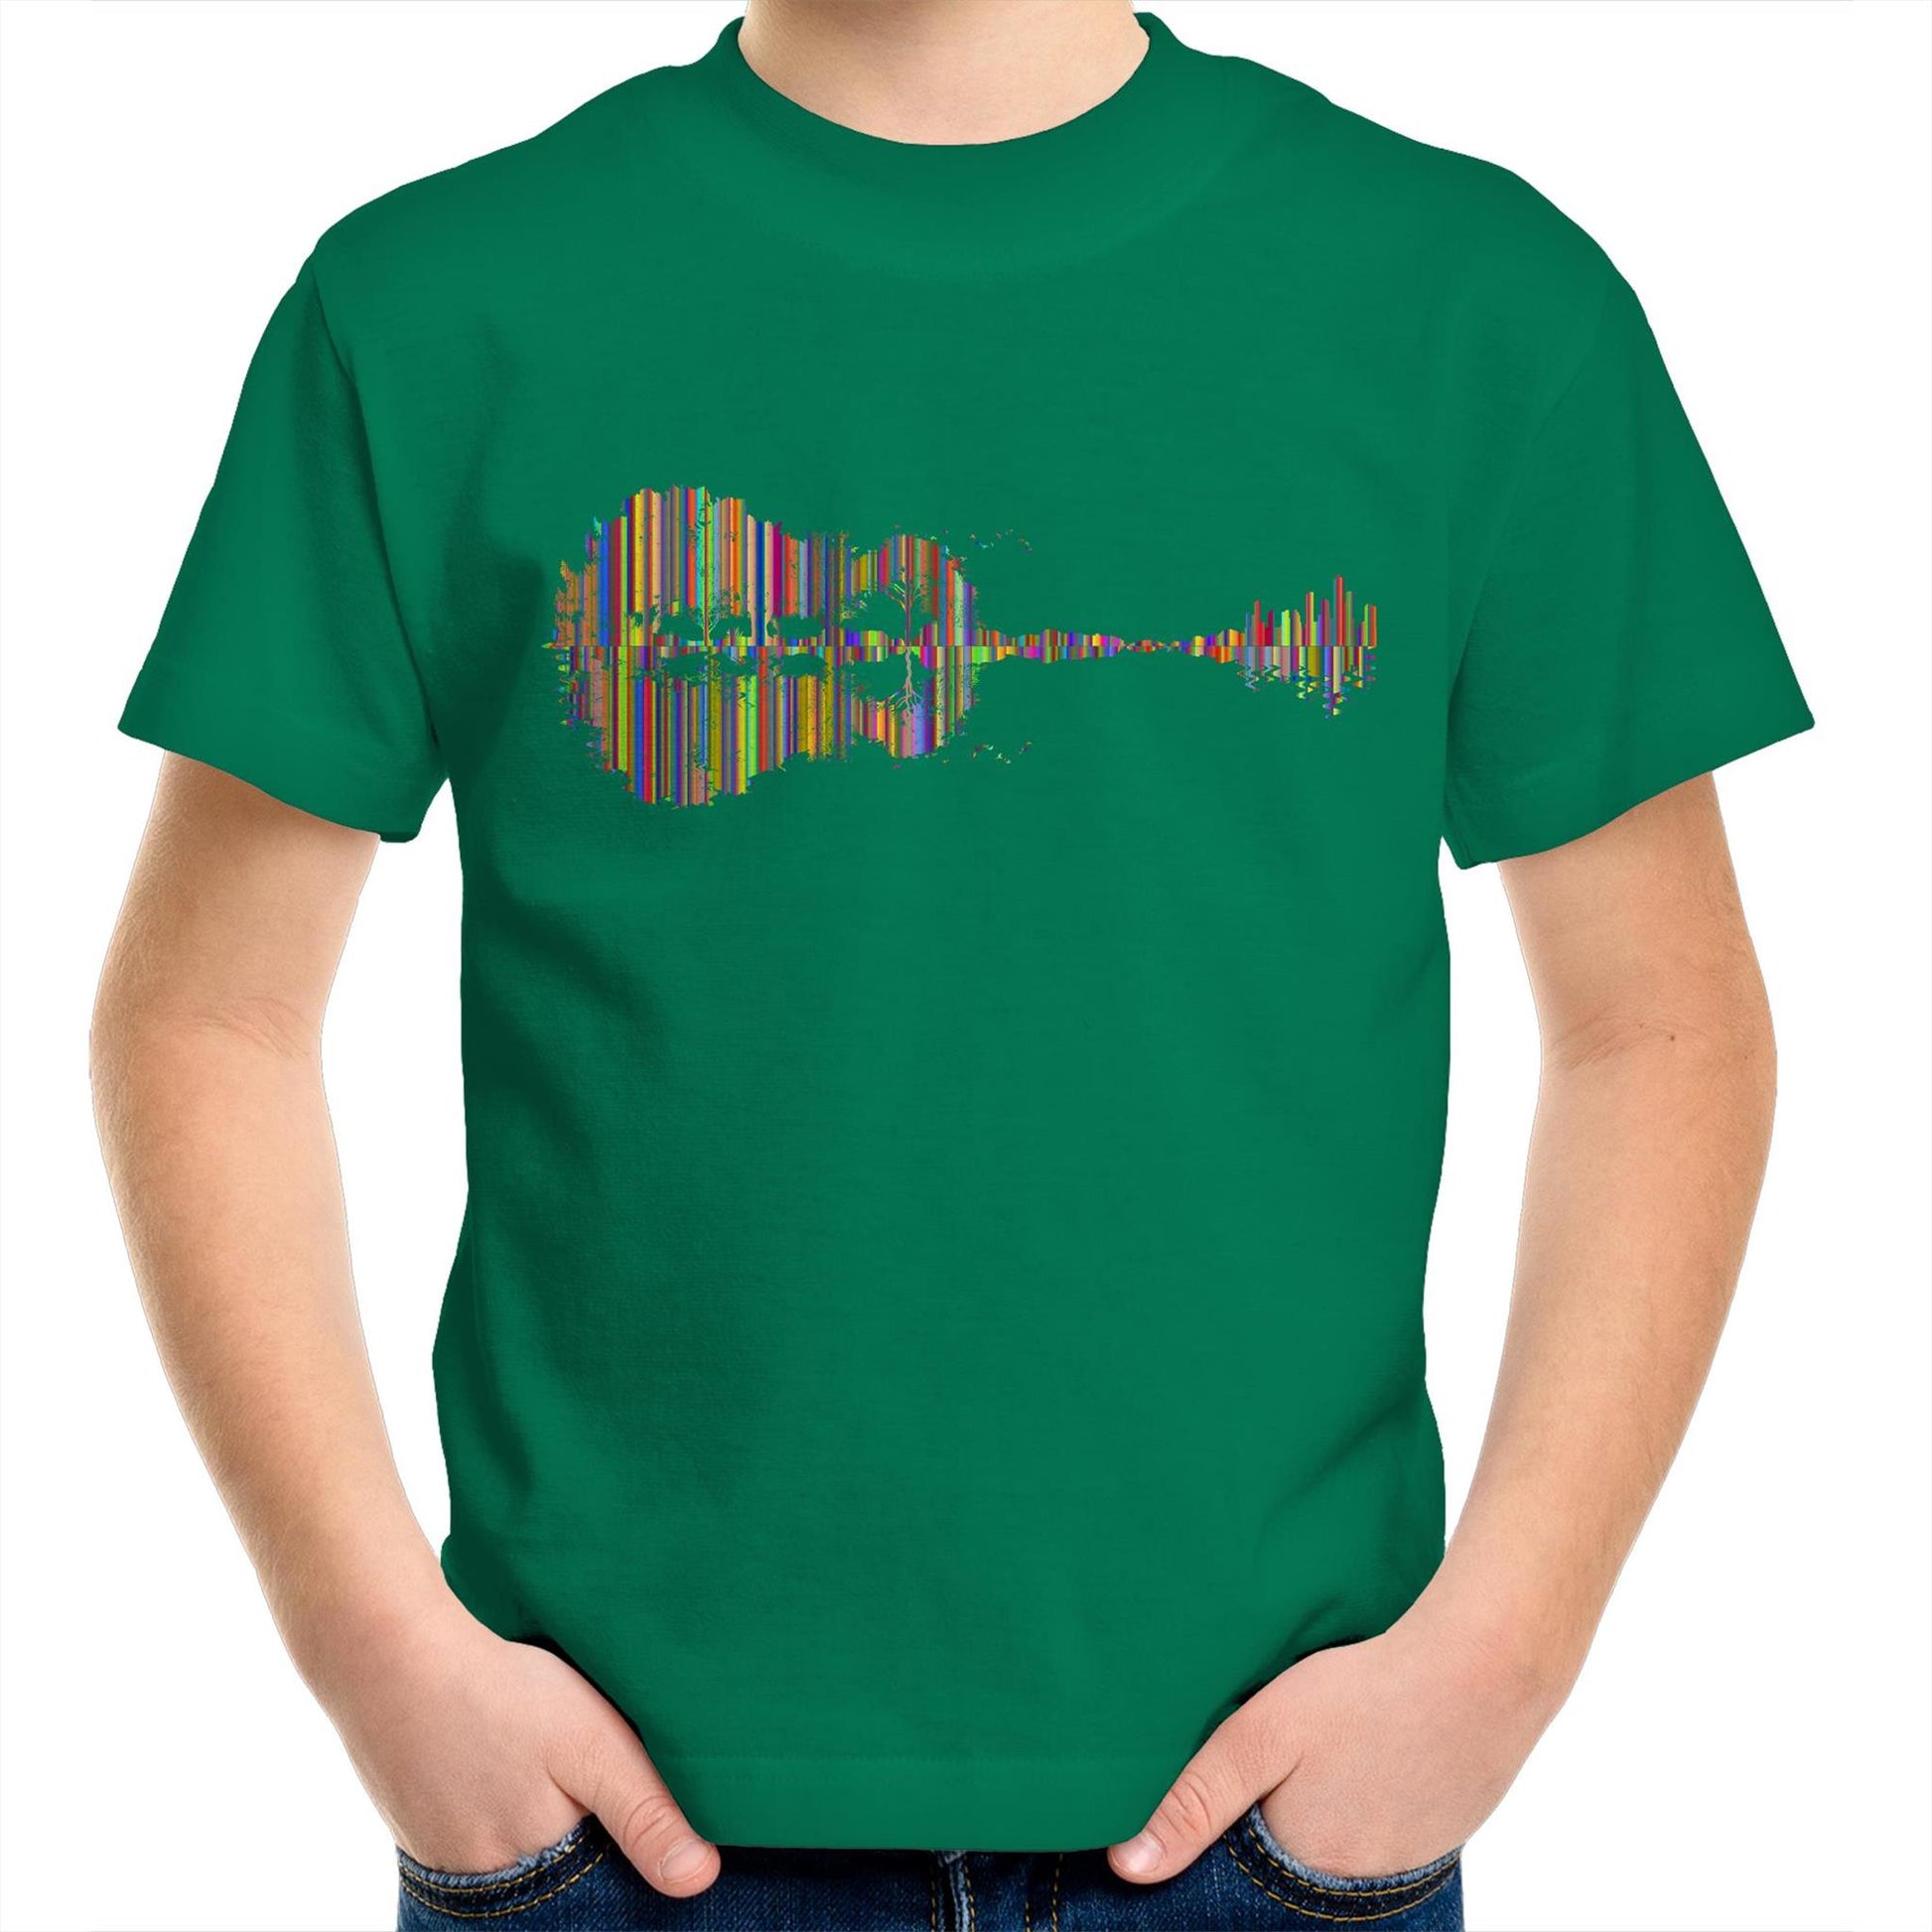 Guitar Reflection In Colour - Kids Youth Crew T-Shirt Kelly Green Kids Youth T-shirt Music